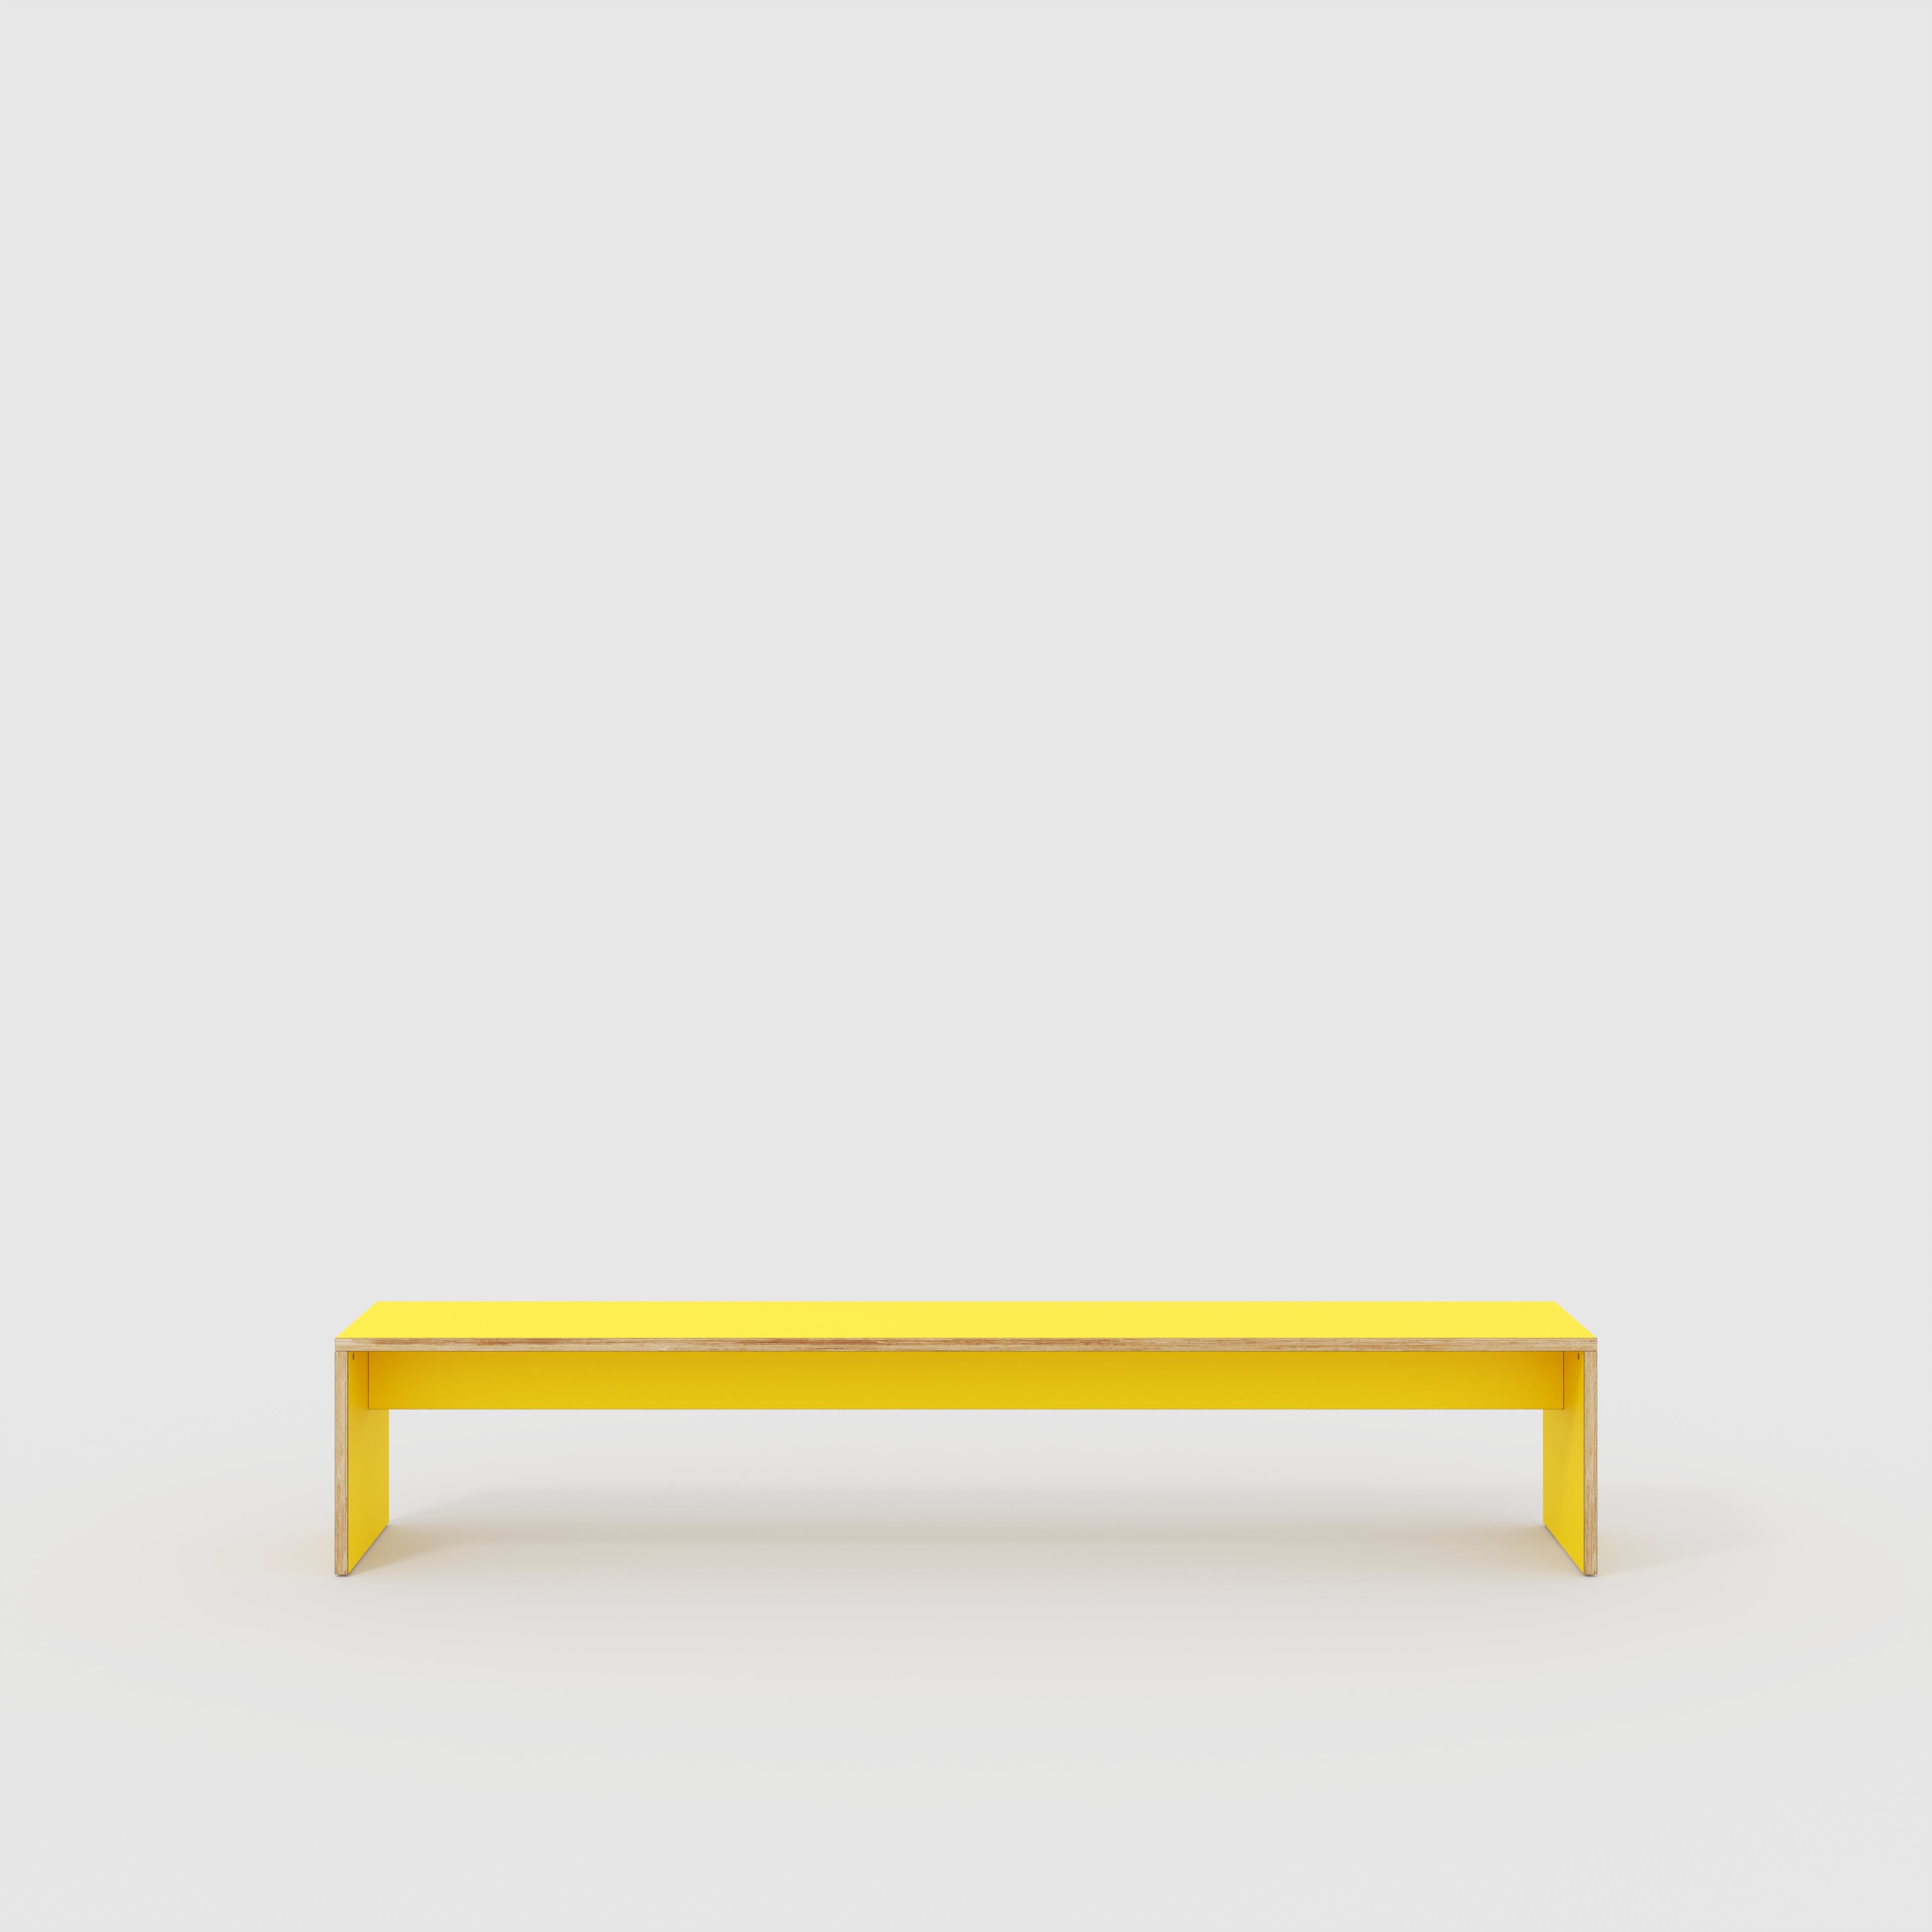 Bench Seat with Solid Sides - Formica Chrome Yellow - 2400(w) x 400(d)